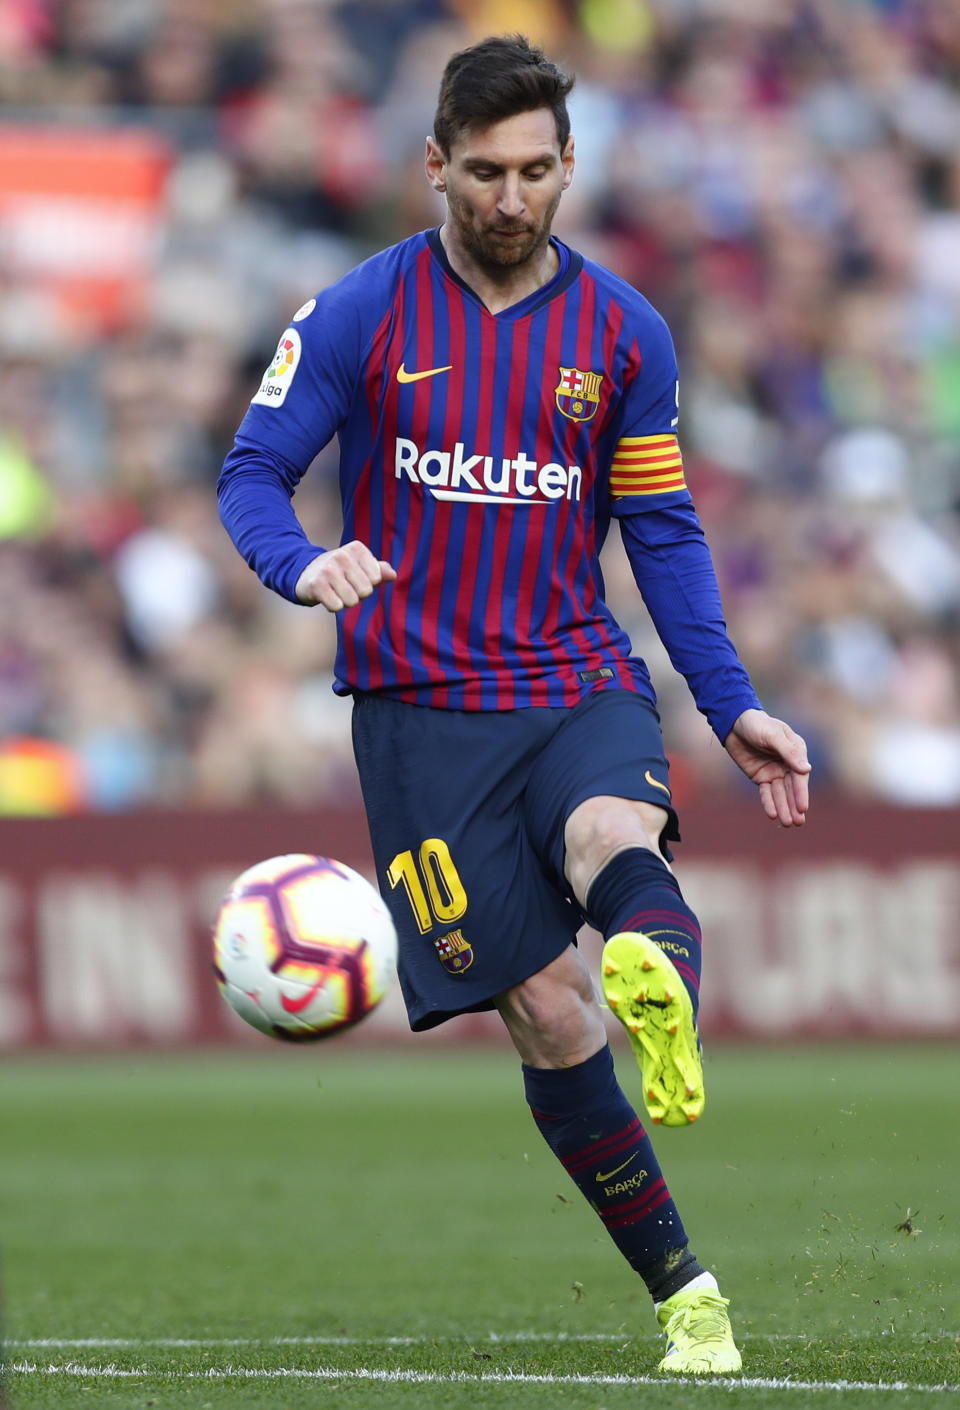 Barcelona's Lionel Messi shoots from a free kick to score the opening goal during a Spanish La Liga soccer match between FC Barcelona and Espanyol at the Camp Nou stadium in Barcelona, Spain, Saturday March 30, 2019. (AP Photo/Manu Fernandez)